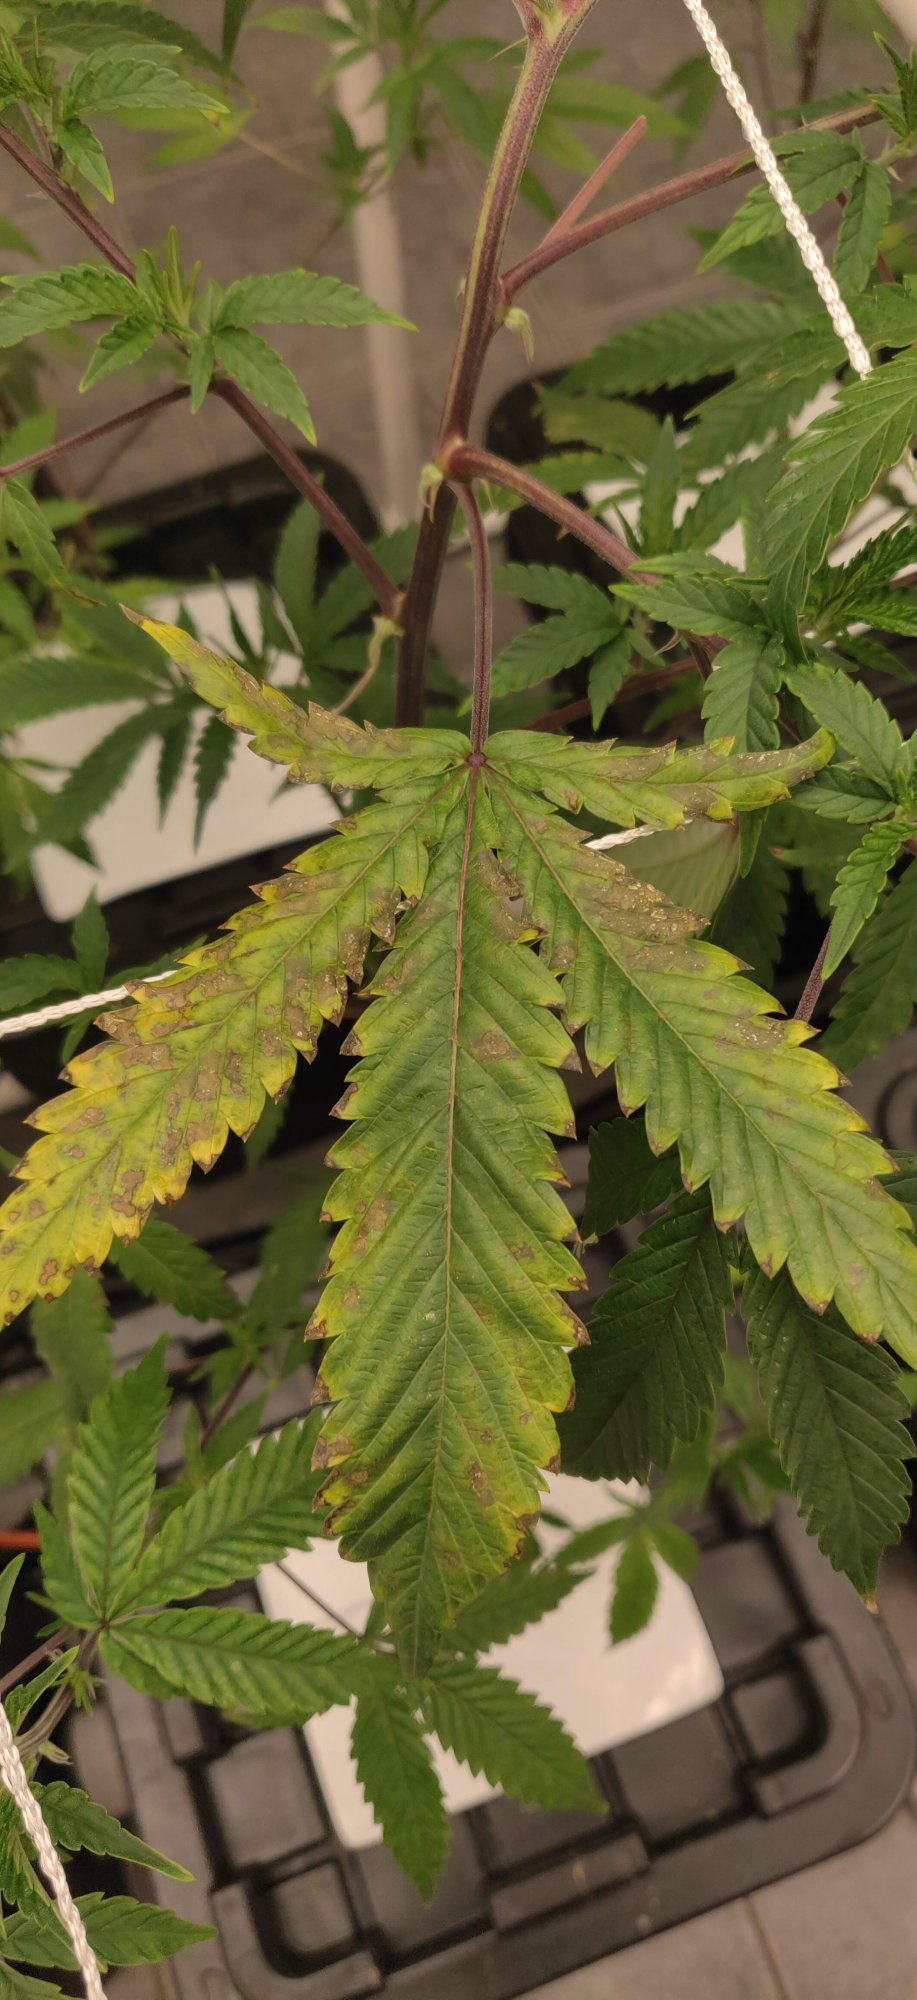 Help diagnose spots on leaves new grower 11